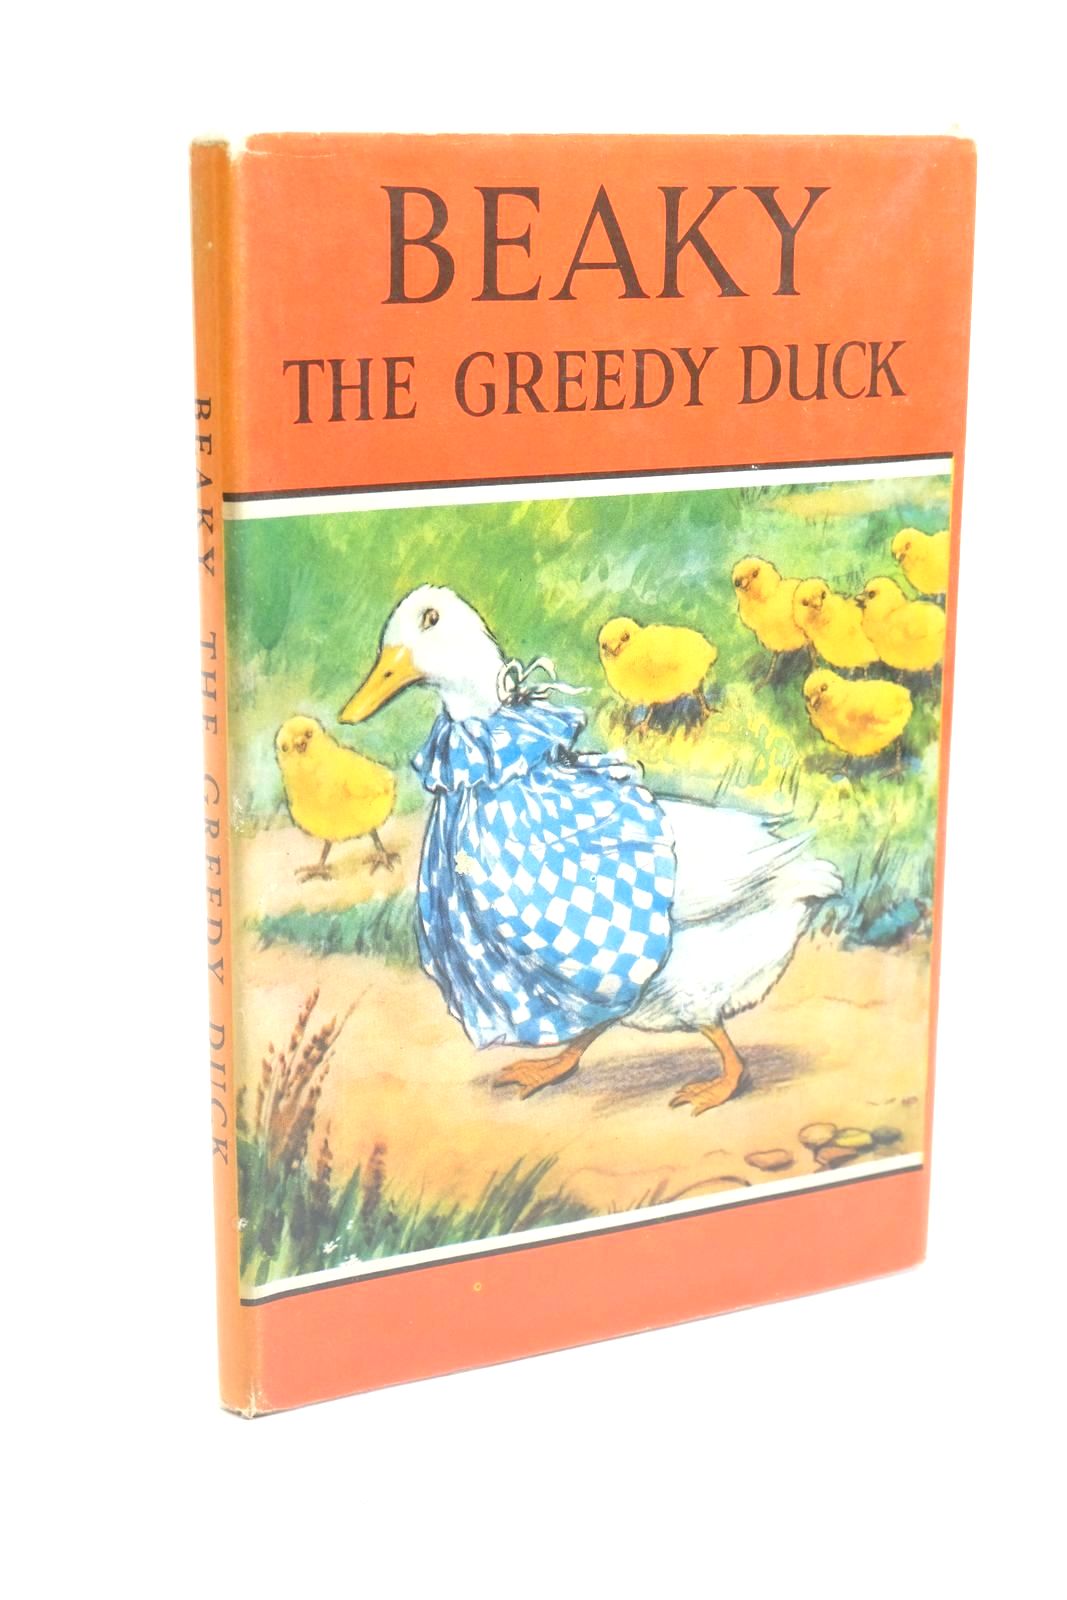 Photo of BEAKY THE GREEDY DUCK written by Barr, Noel illustrated by Hickling, P.B. published by Wills &amp; Hepworth Ltd. (STOCK CODE: 1322398)  for sale by Stella & Rose's Books